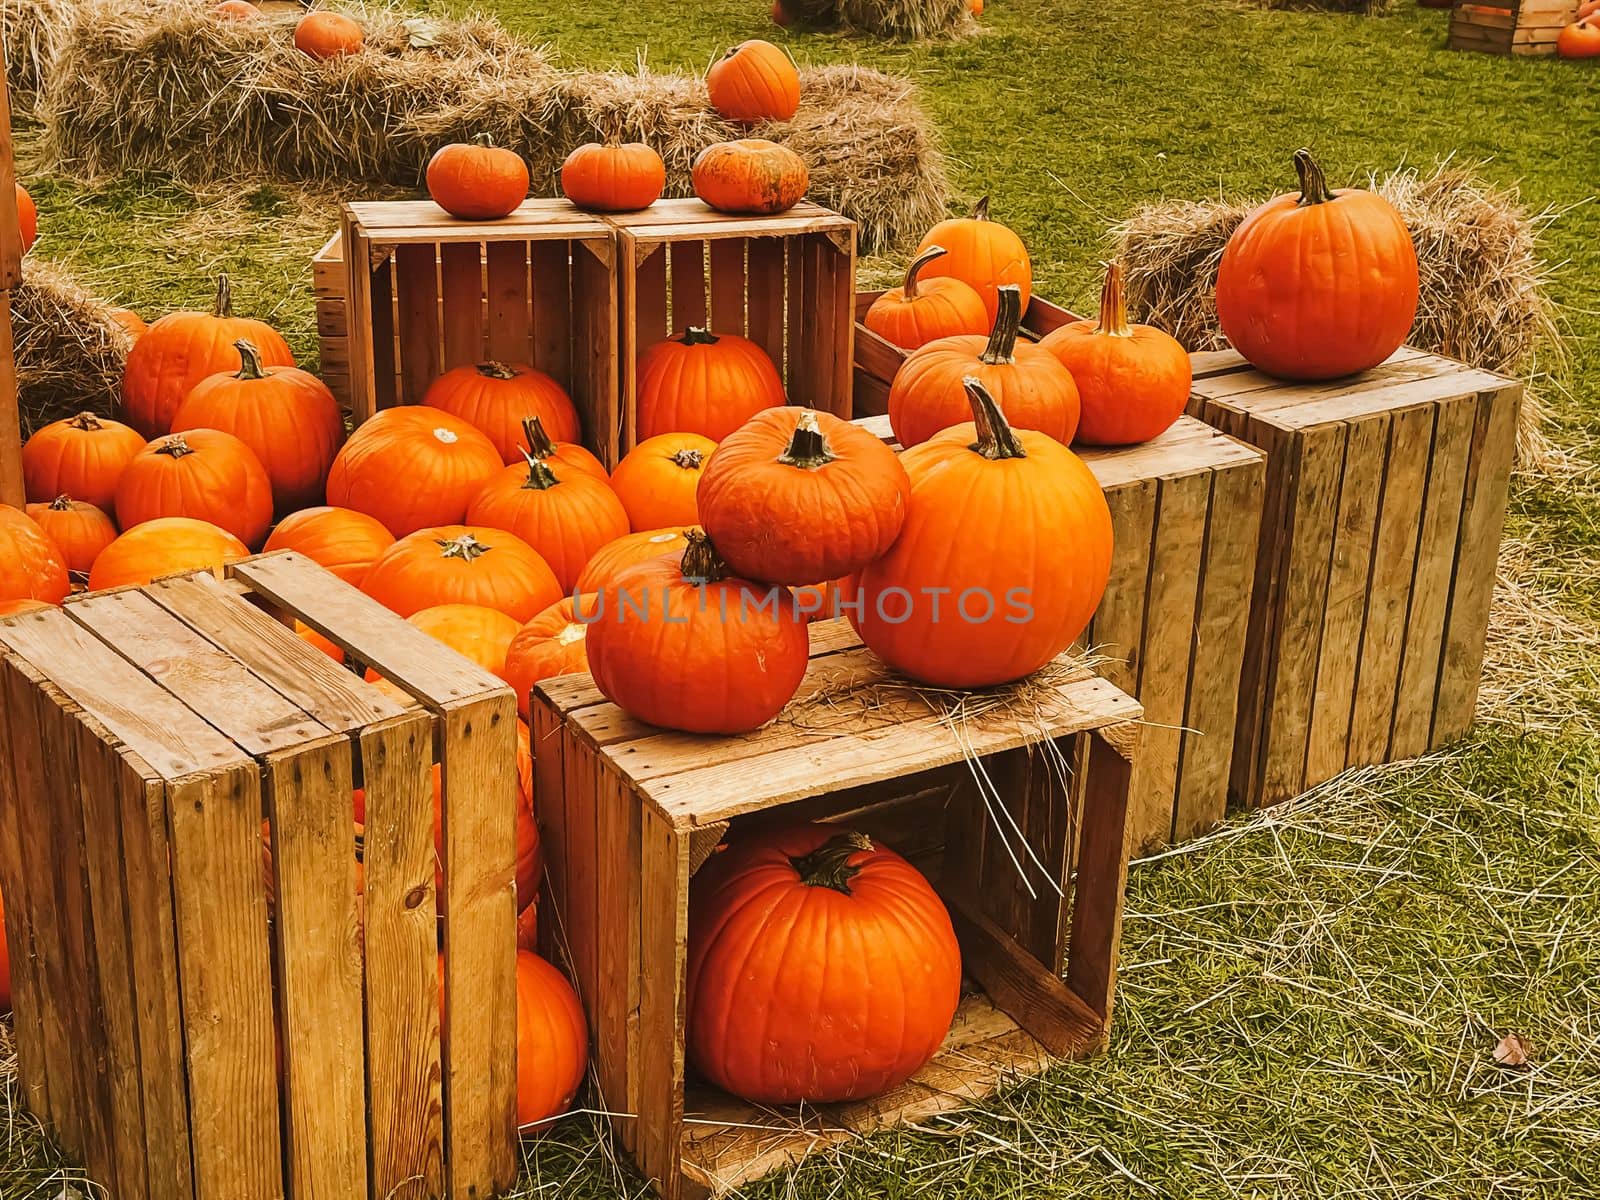 Halloween pumpkins and holiday decoration in autumn season rural field, pumpkin harvest and seasonal agriculture, outdoors in nature scene